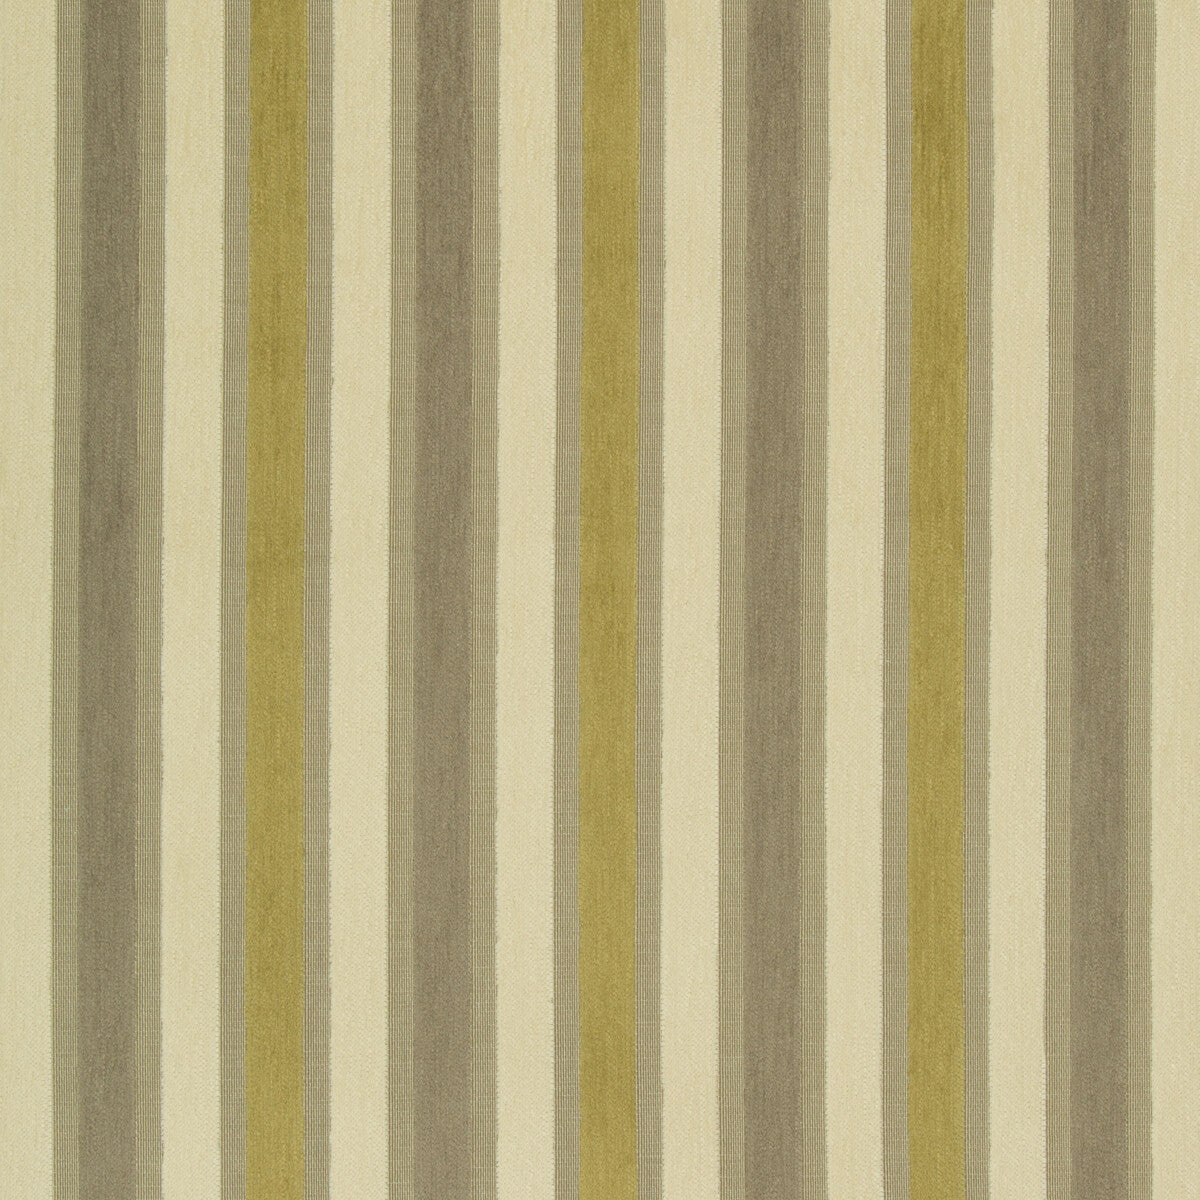 Guru fabric in lotus color - pattern 35083.1623.0 - by Kravet Contract in the Gis Crypton collection